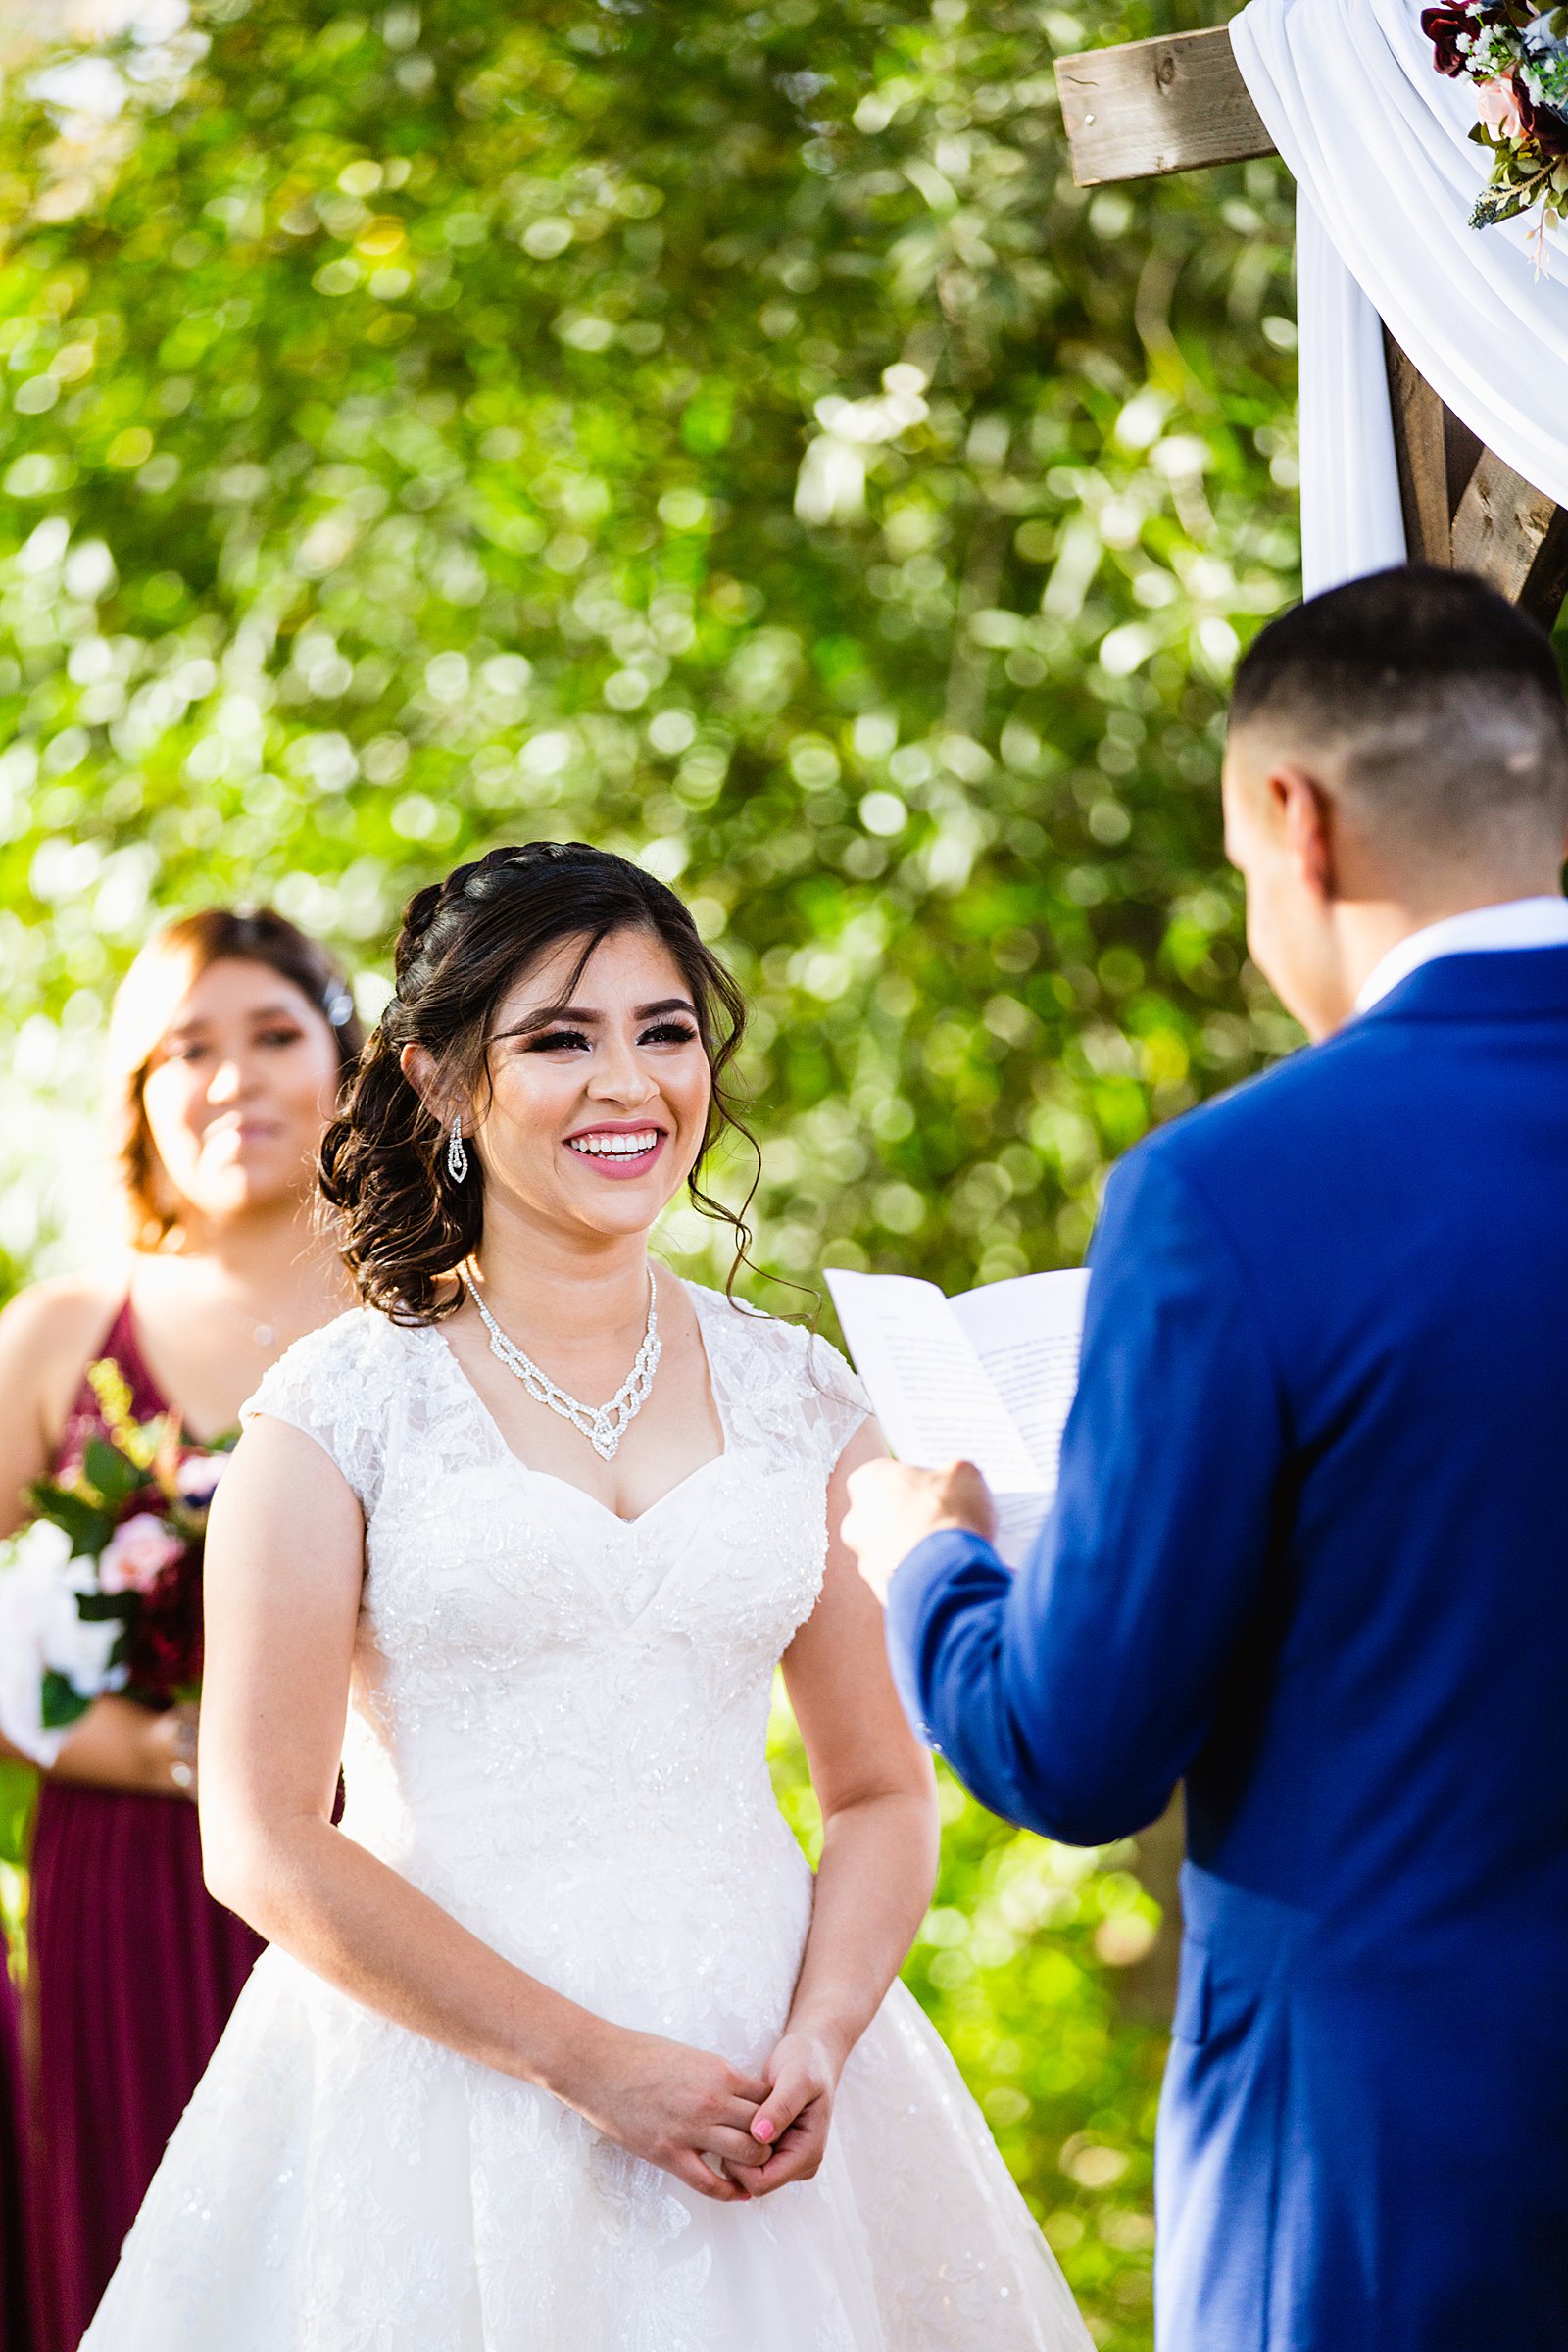 Bride looking at her groom during their wedding ceremony at Valley Garden Center by Phoenix wedding photographer PMA Photography.